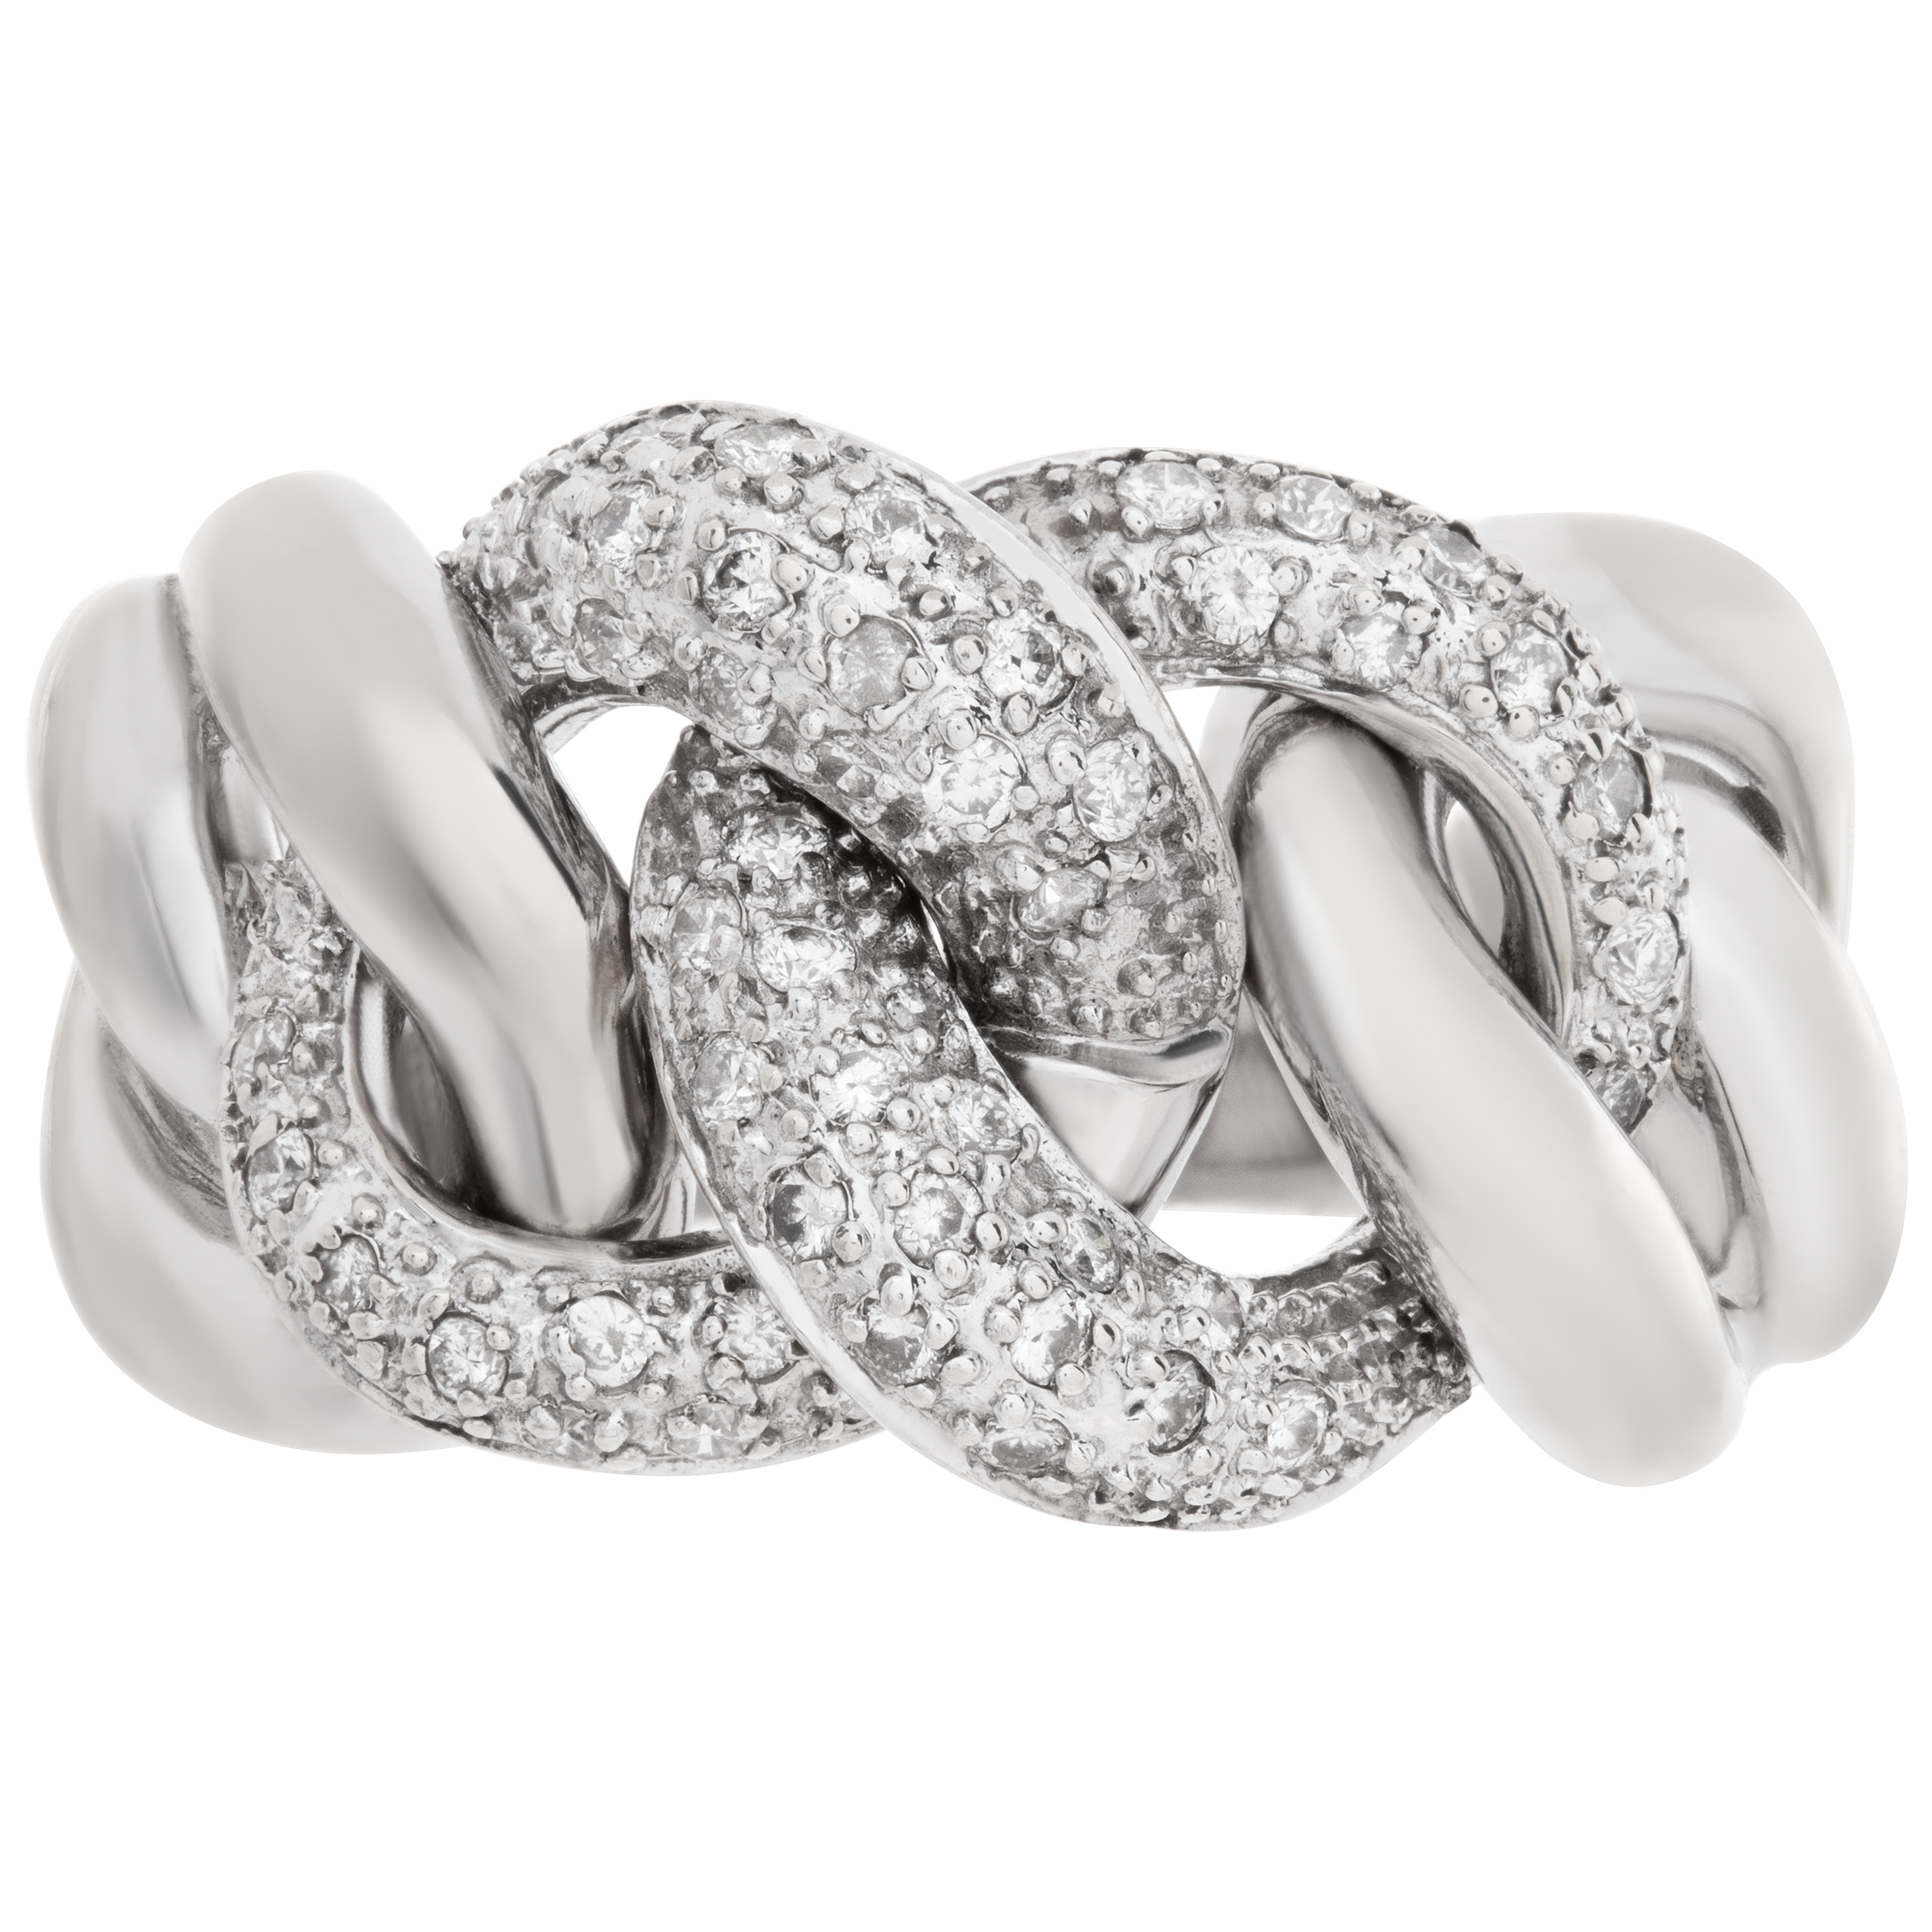 Pave Diamond link ring in 14k white gold. 0.50 carats in diamonds. Size 8 image 2